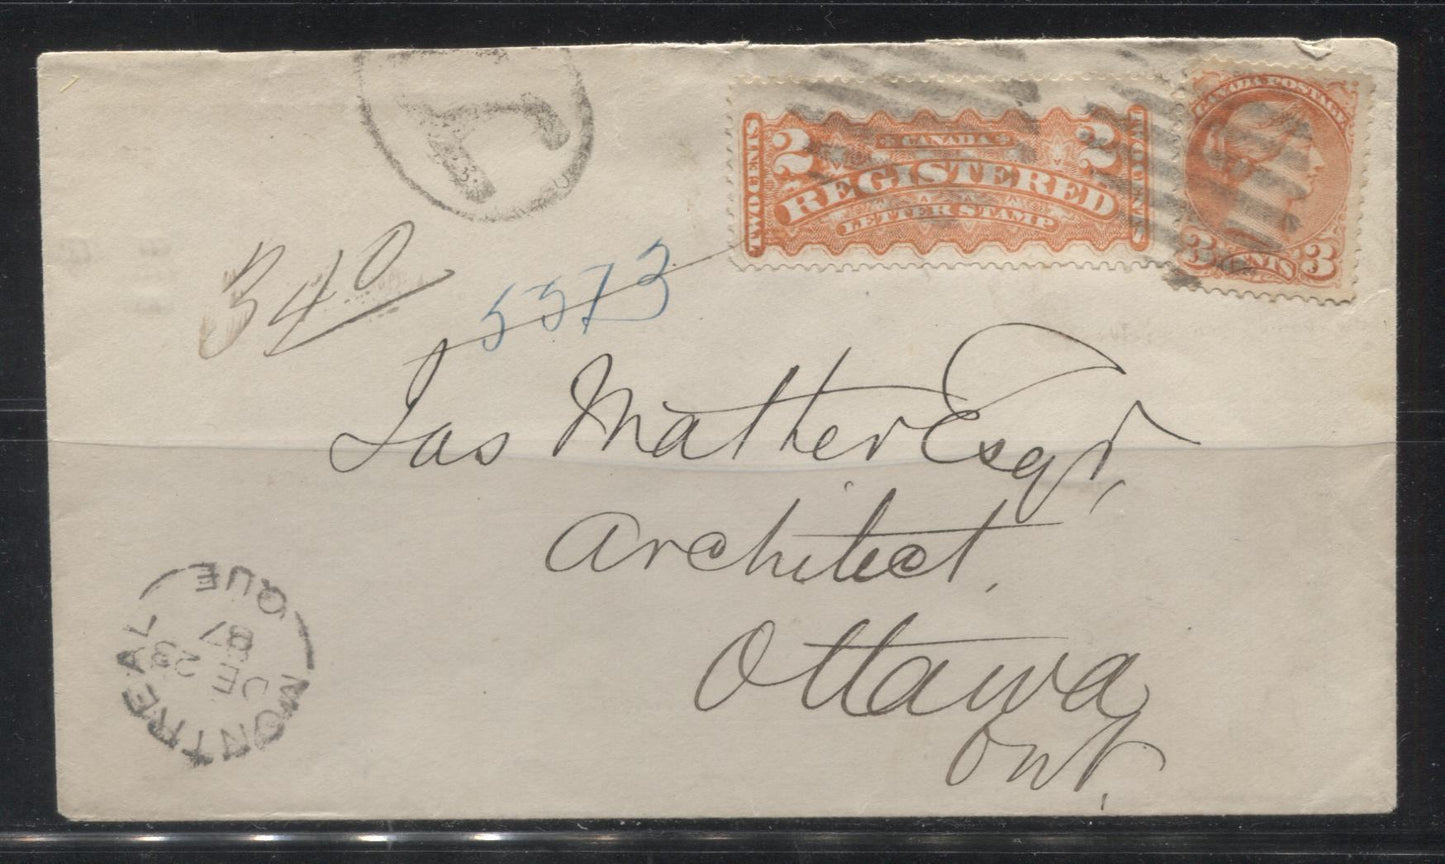 Lot 237 Canada #37, F1a 2c-3c  Queen Victoria, 1870-1897 Small Queen Issue, A VF Combination Registered and 3c Small Queen Franking on 1887 Cover to Ottawa